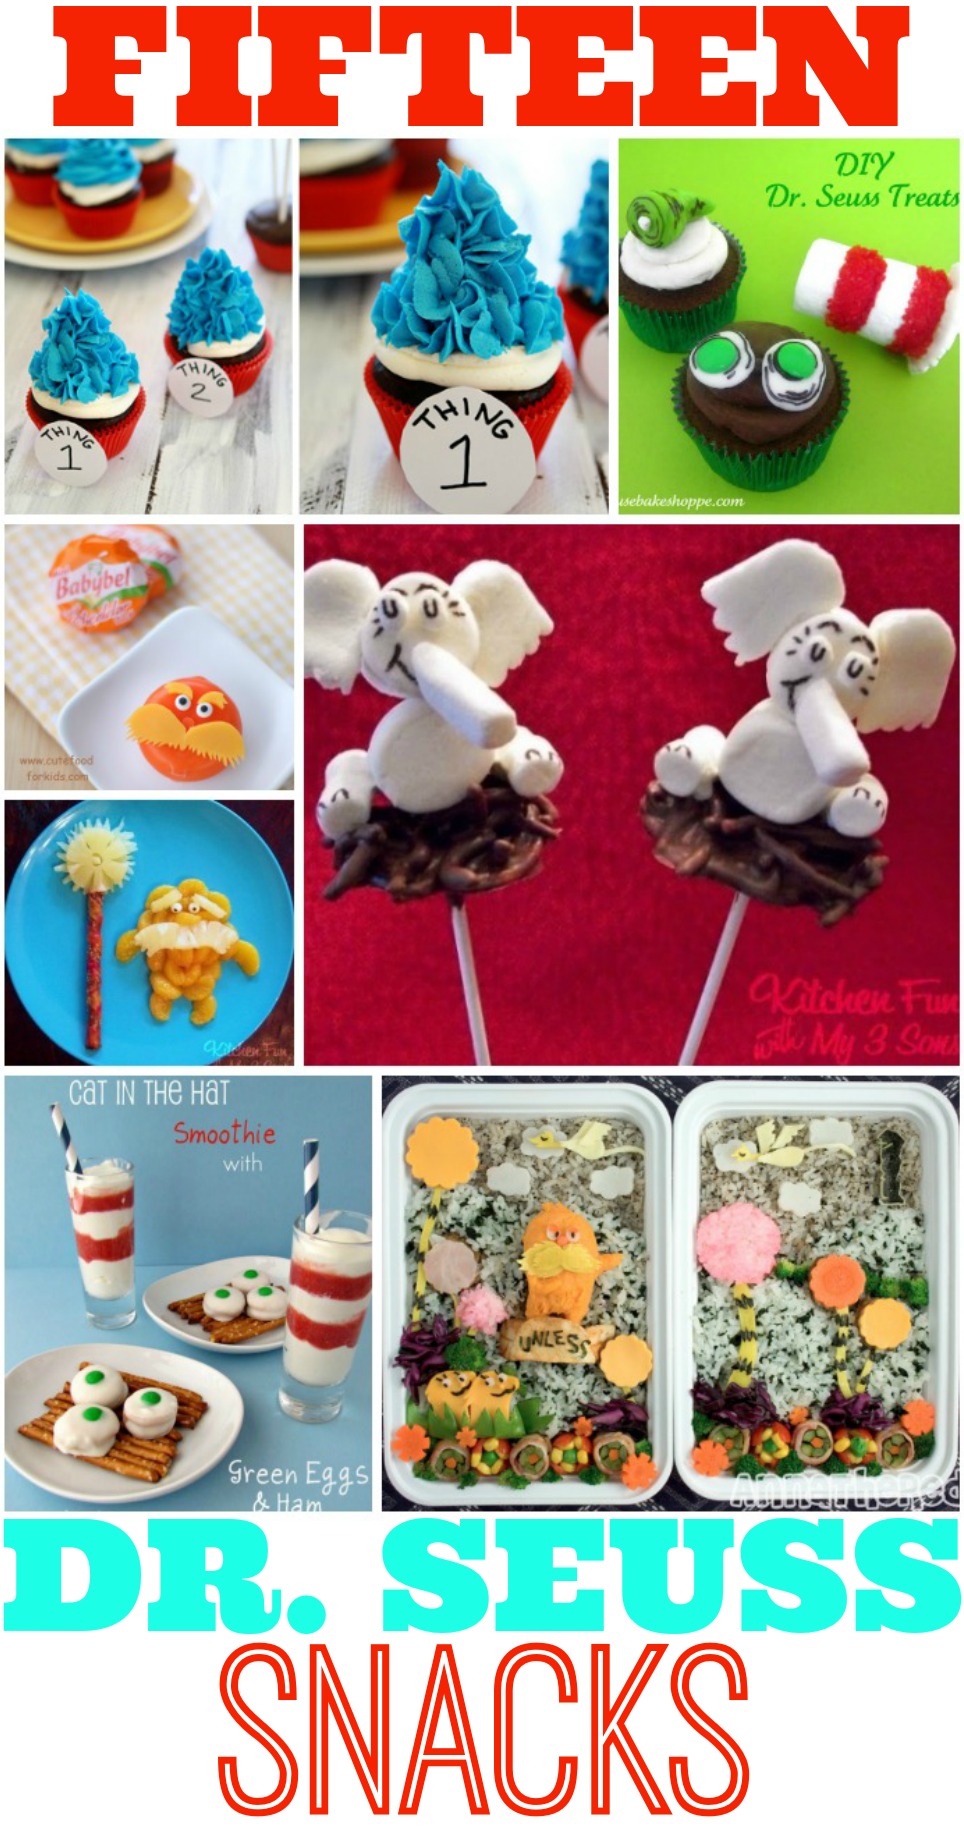 15 Dr. Seuss Inspired Snacks and Treats